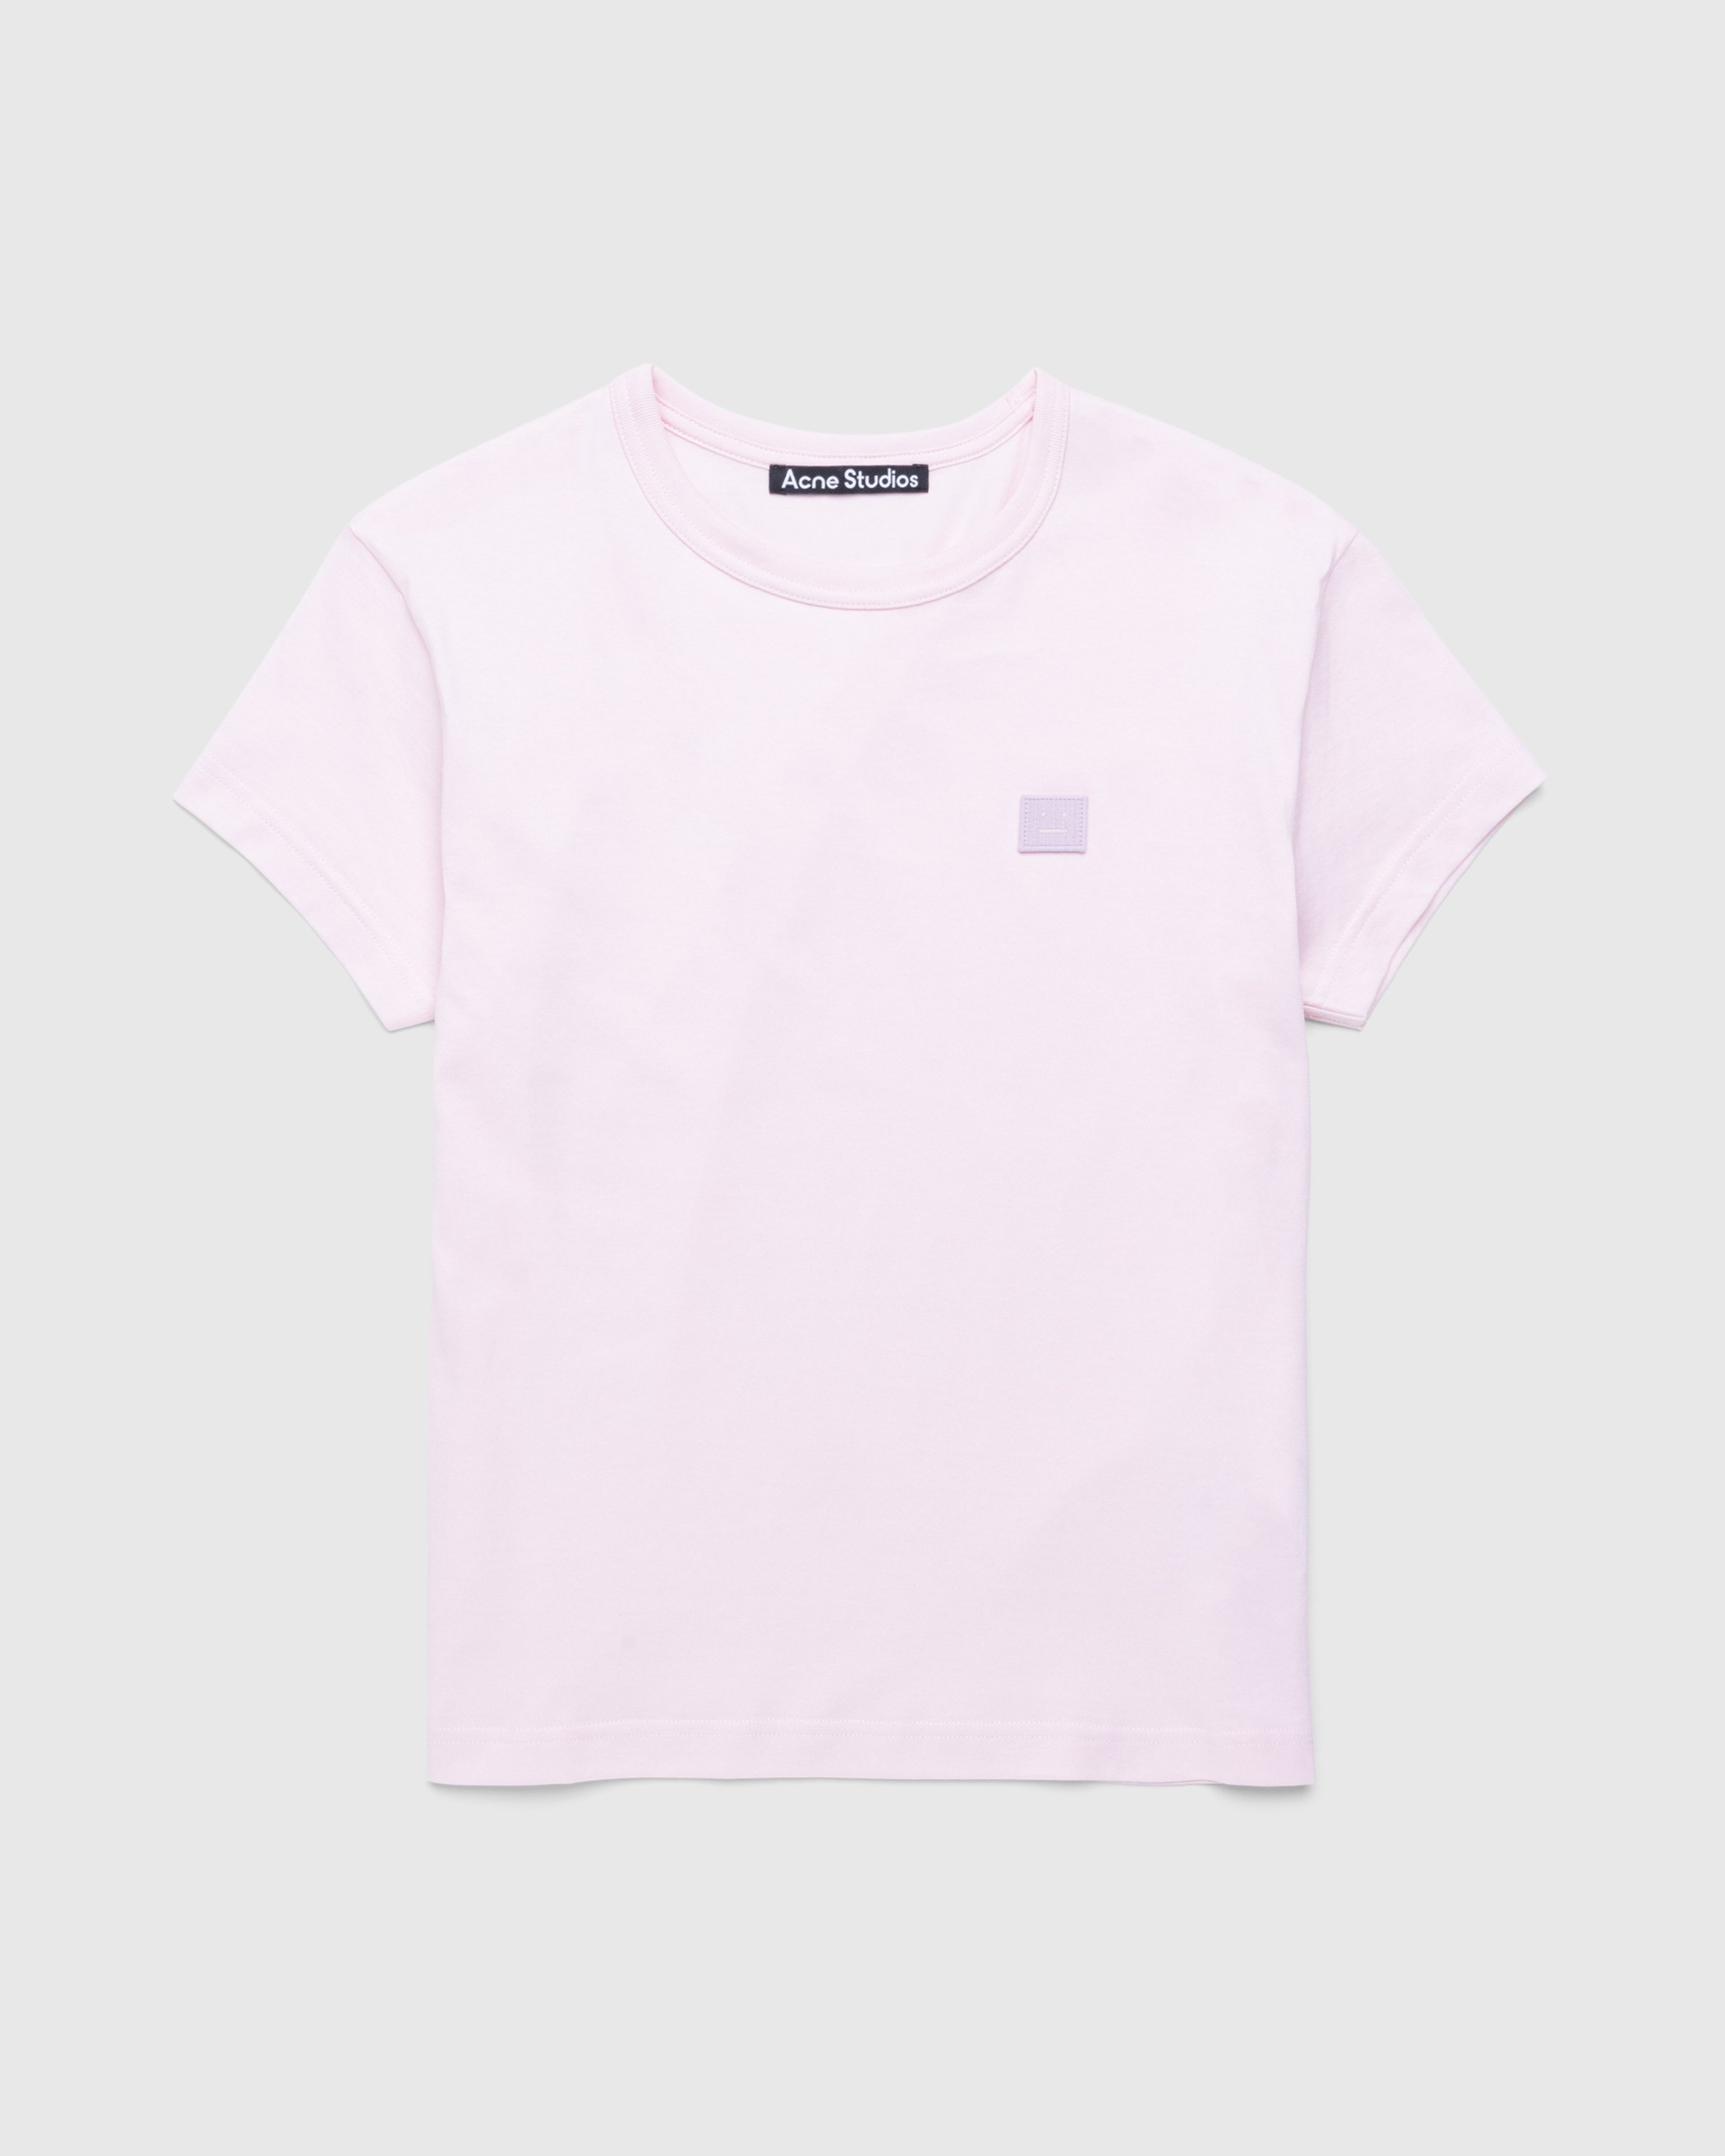 Acne Studios - Fitted Crewneck T-Shirt Light Pink - Clothing - Pink - Image 1